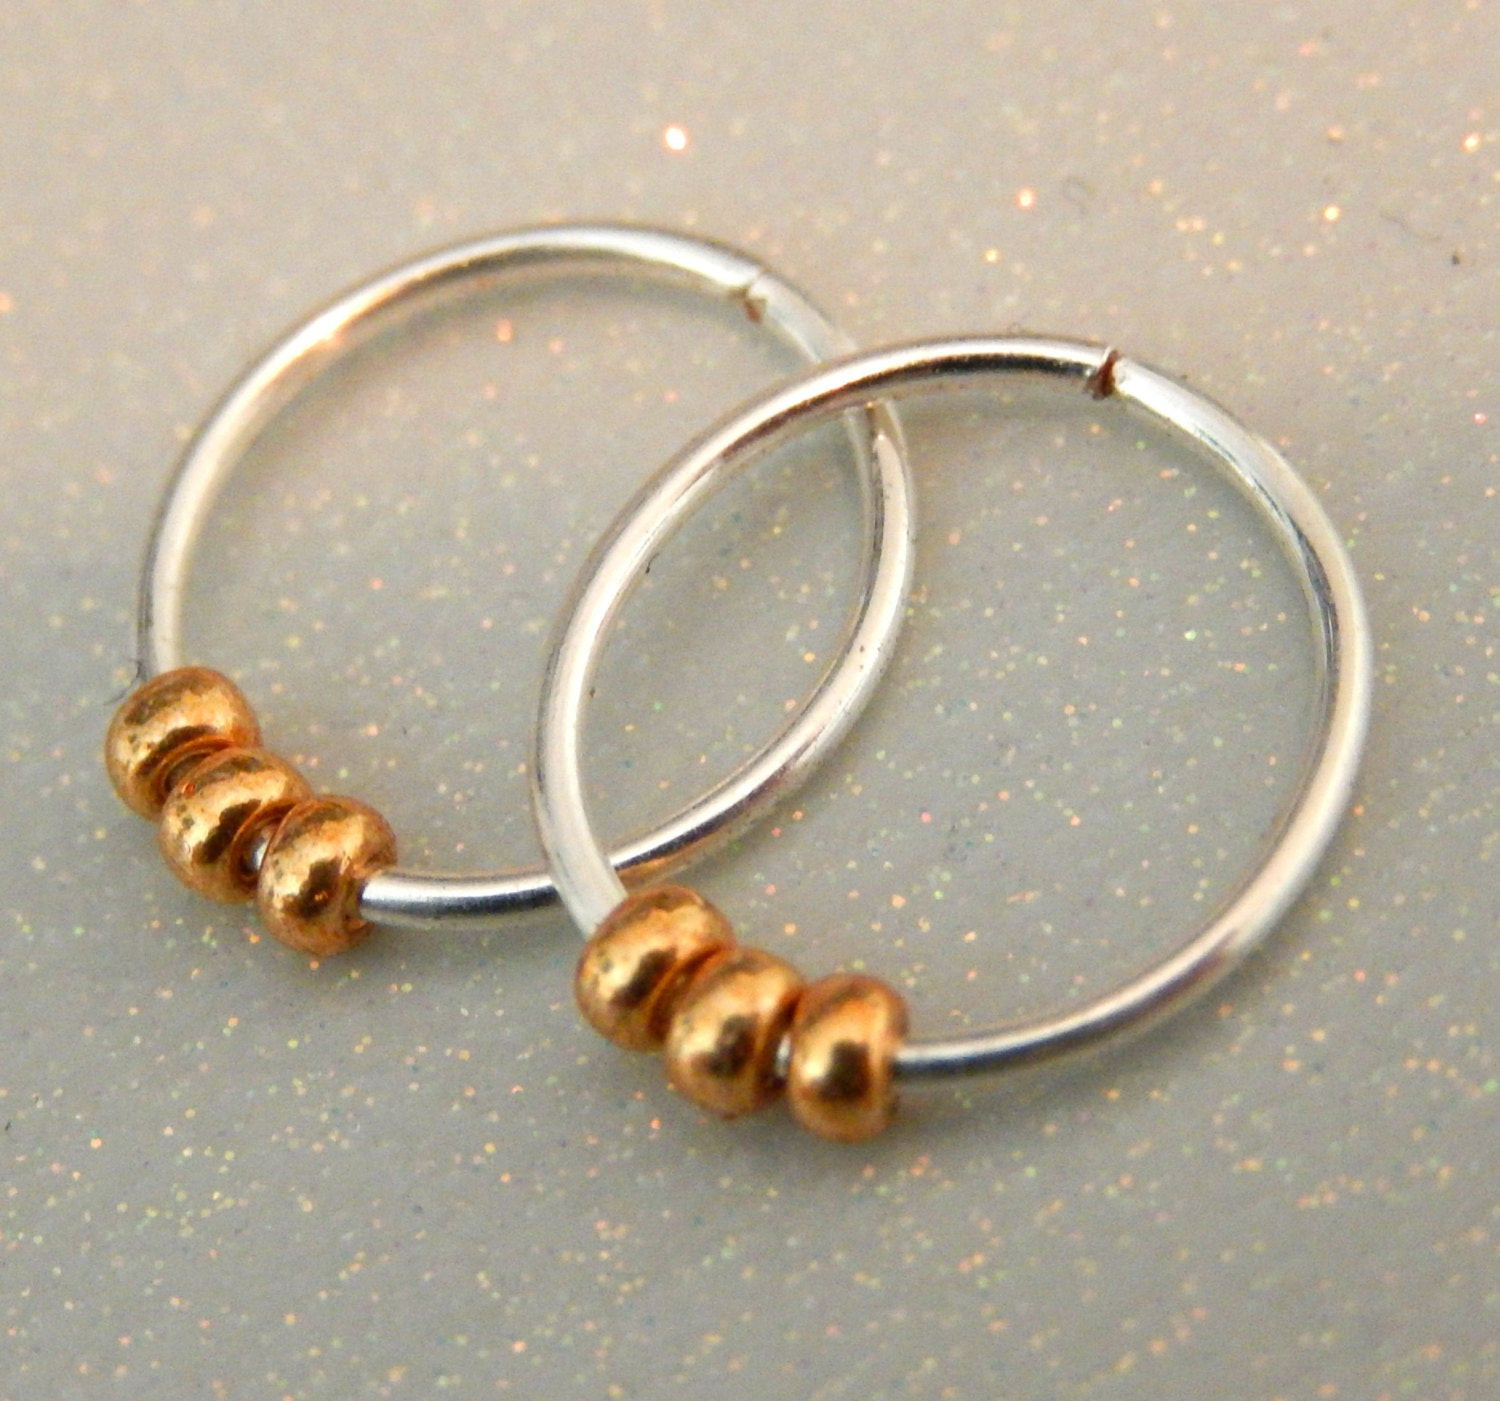 Small Hoop Earrings For Cartilage
 Small Sterling Silver Hoops Silver Wire Earrings Cartilage